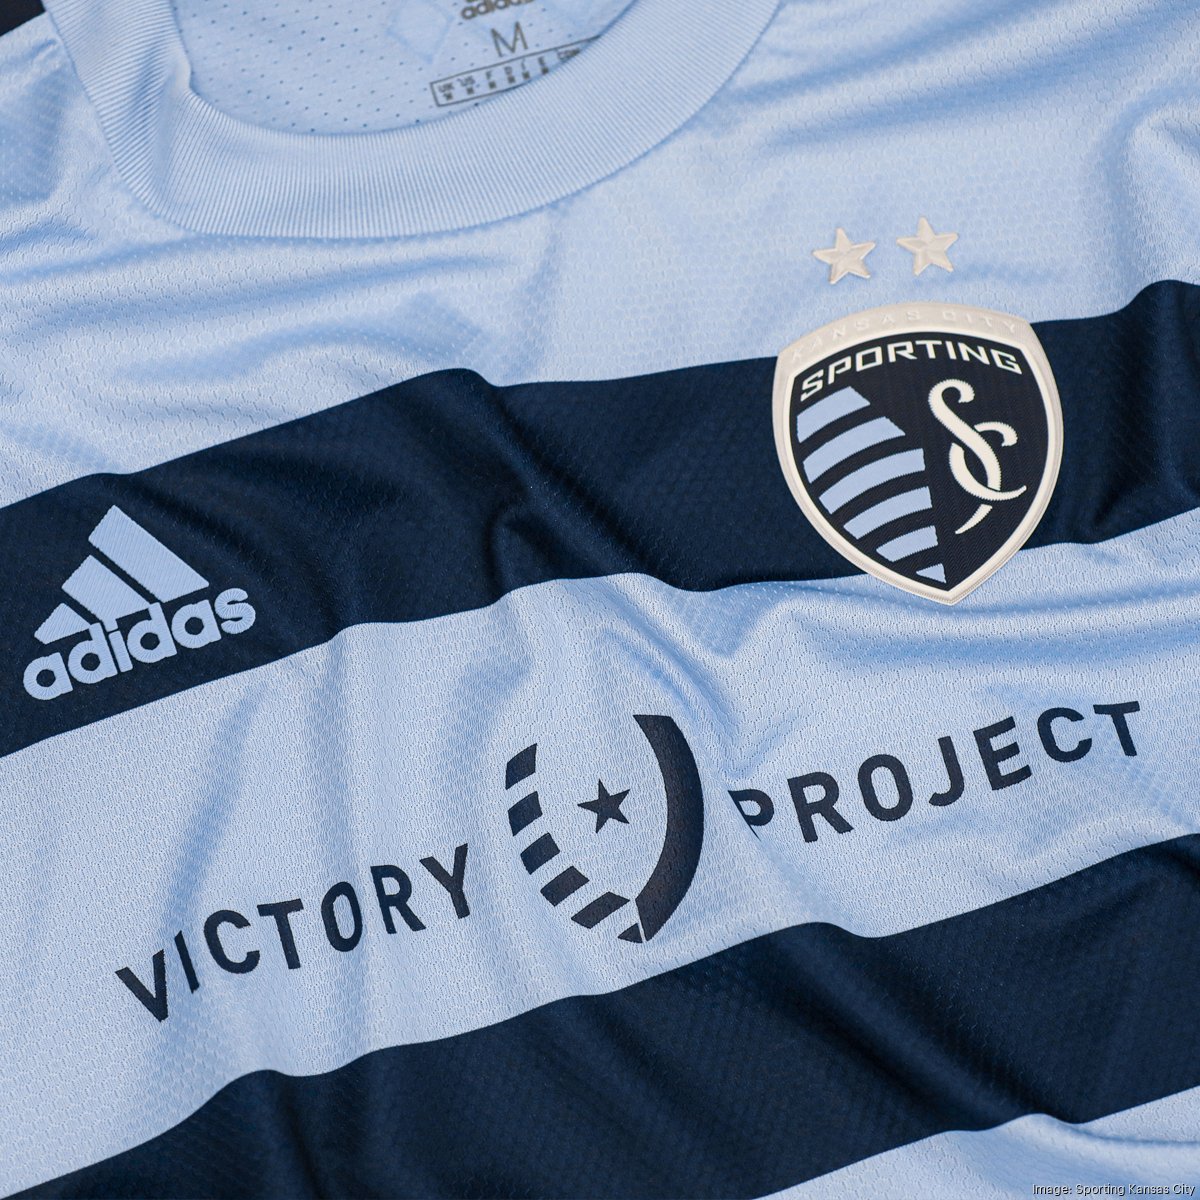 MLS announces new sponsored jersey patch beginning in 2020